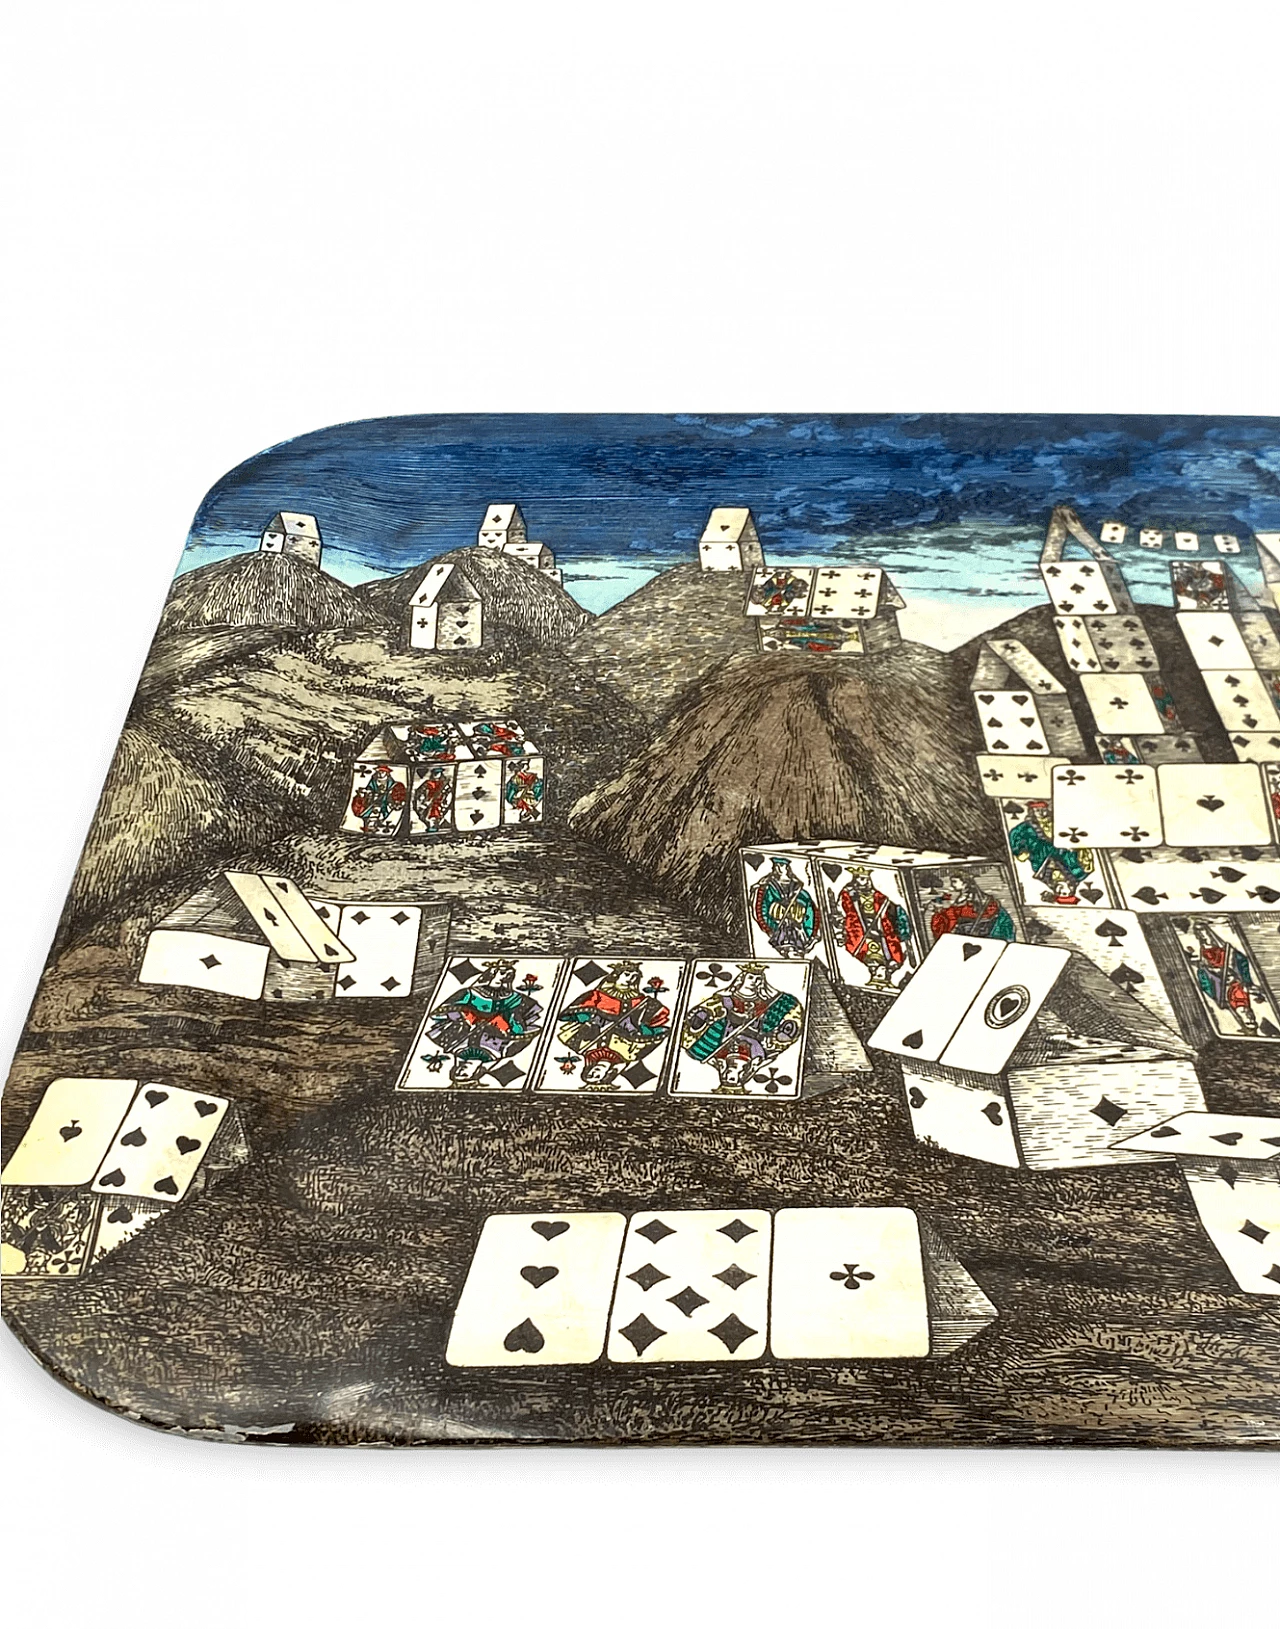 Folding City of Cards coffee table by Piero Fornasetti, 1950s 16